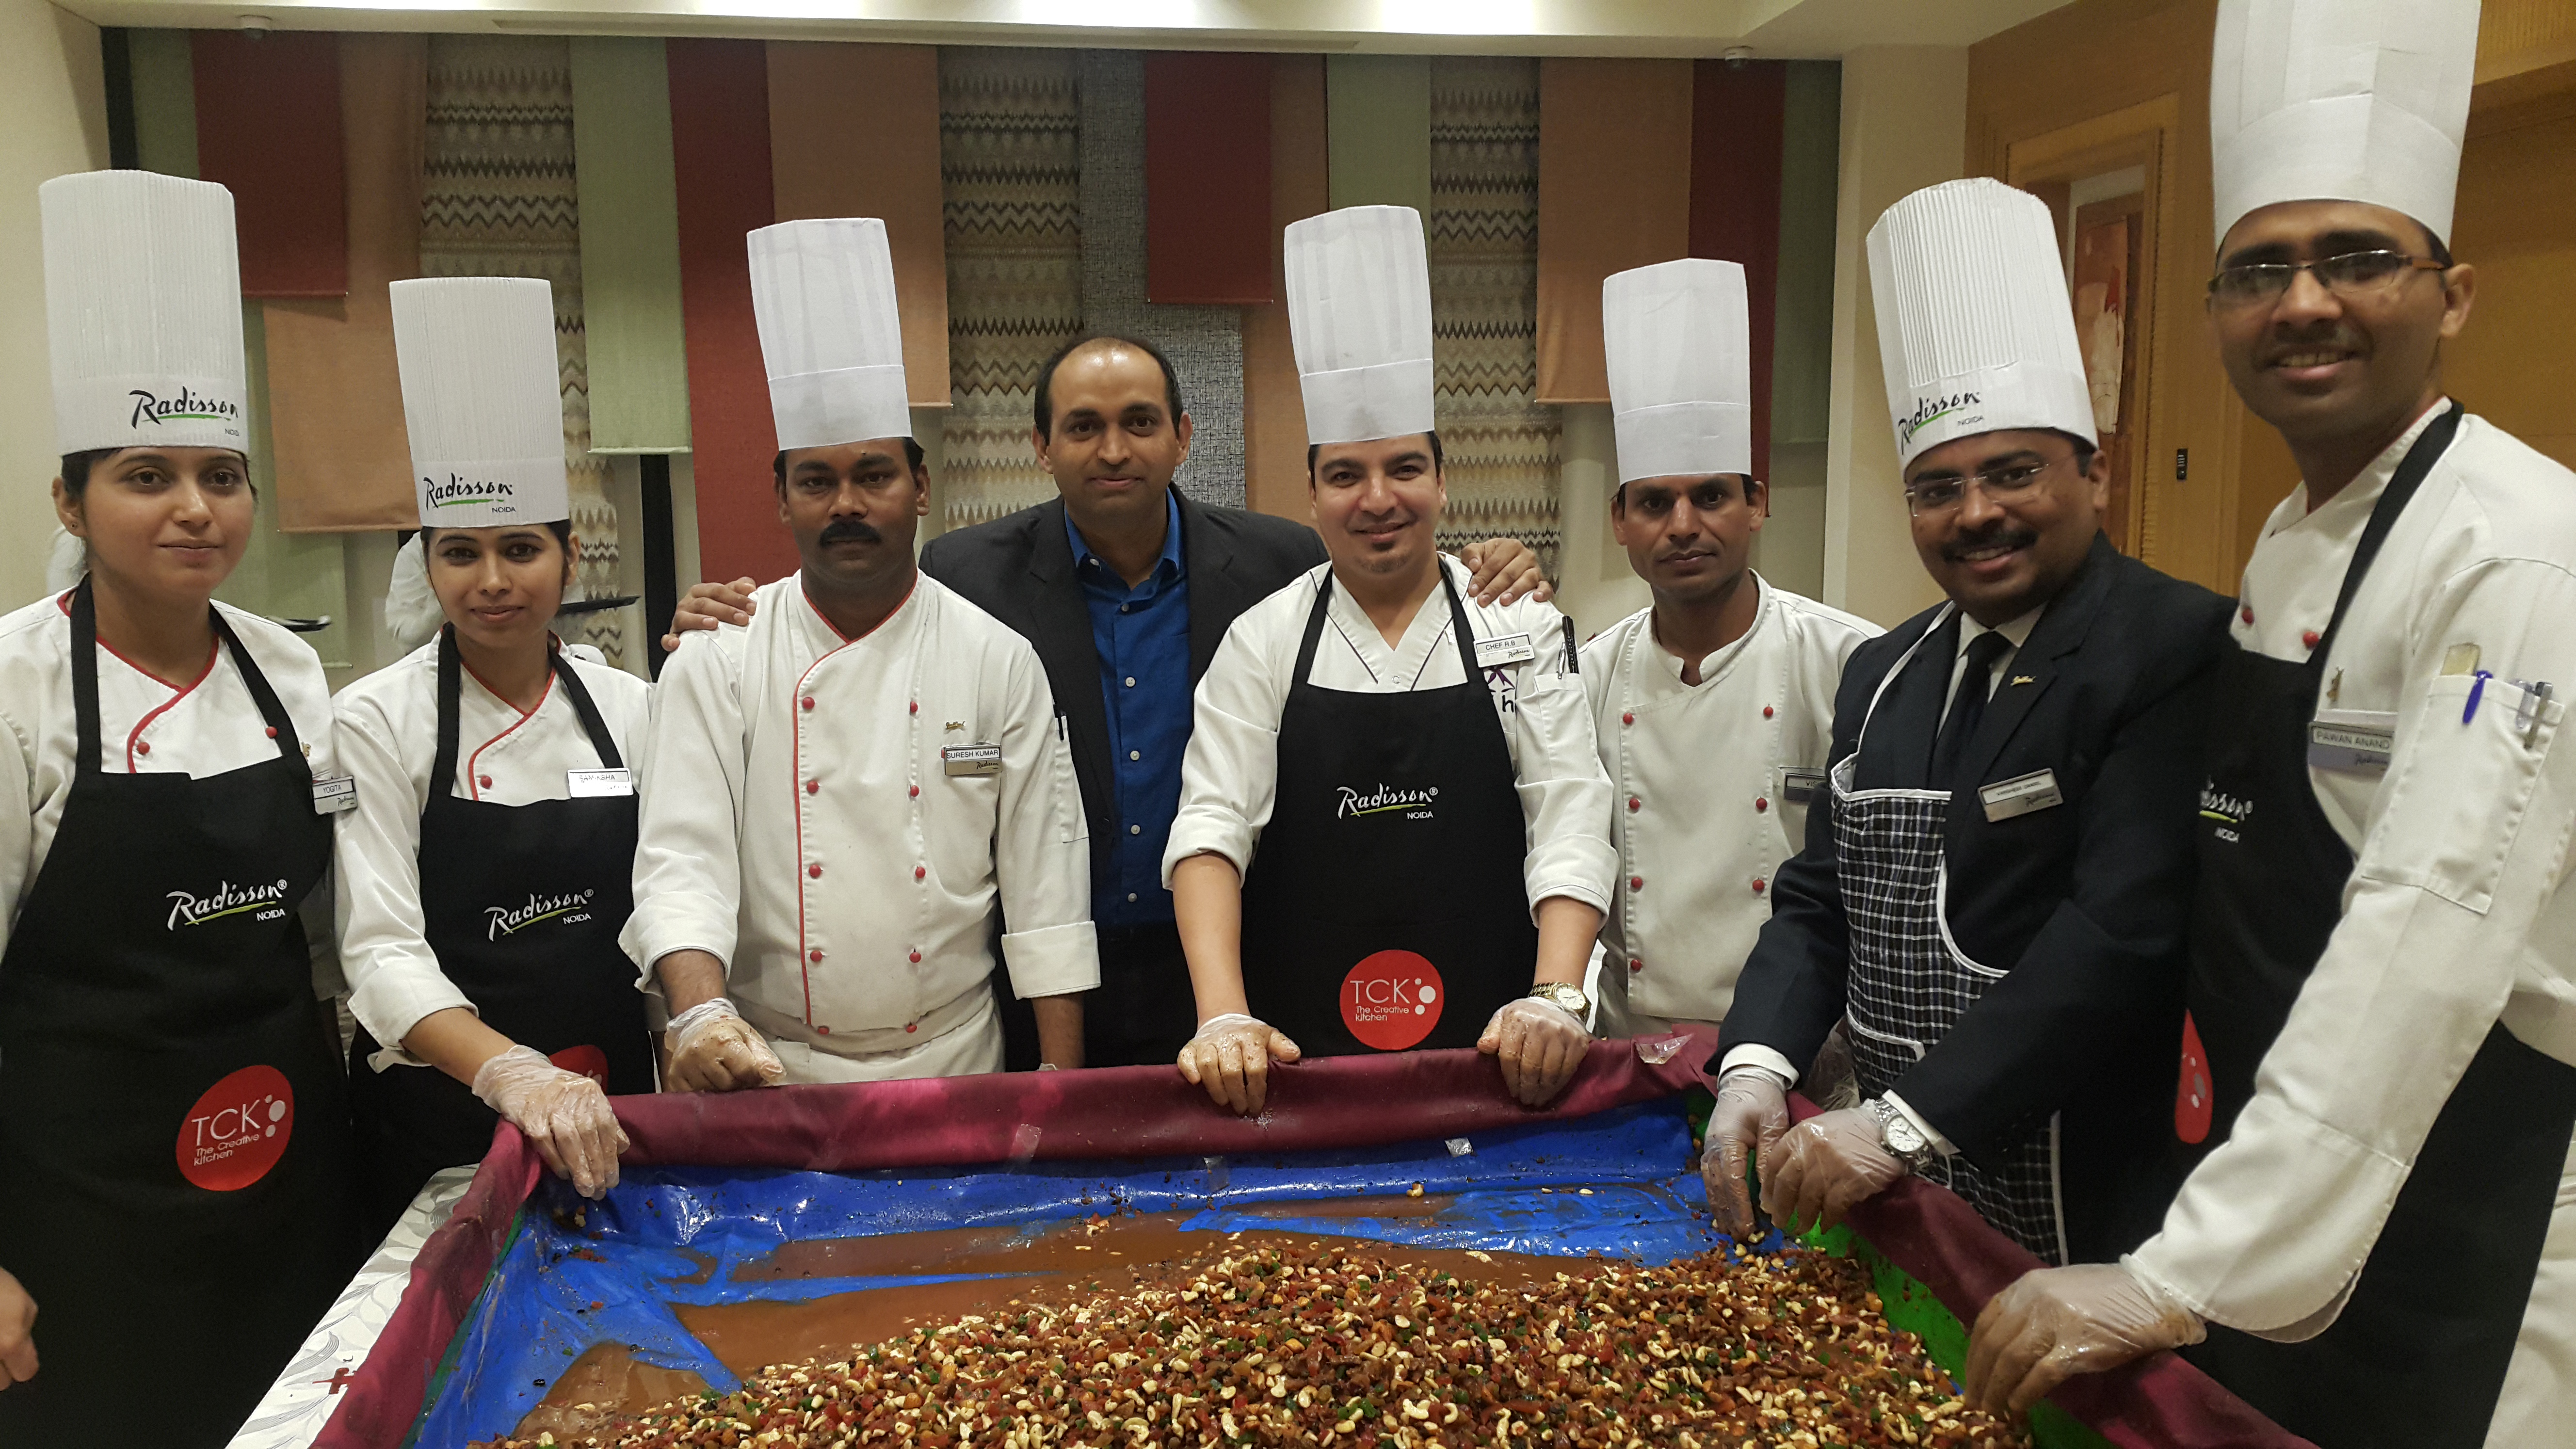 You are currently viewing RADISSON NOIDA WELCOMES THE YULETIDE WITH THE ANNUAL CAKE MIXING CEREMONY